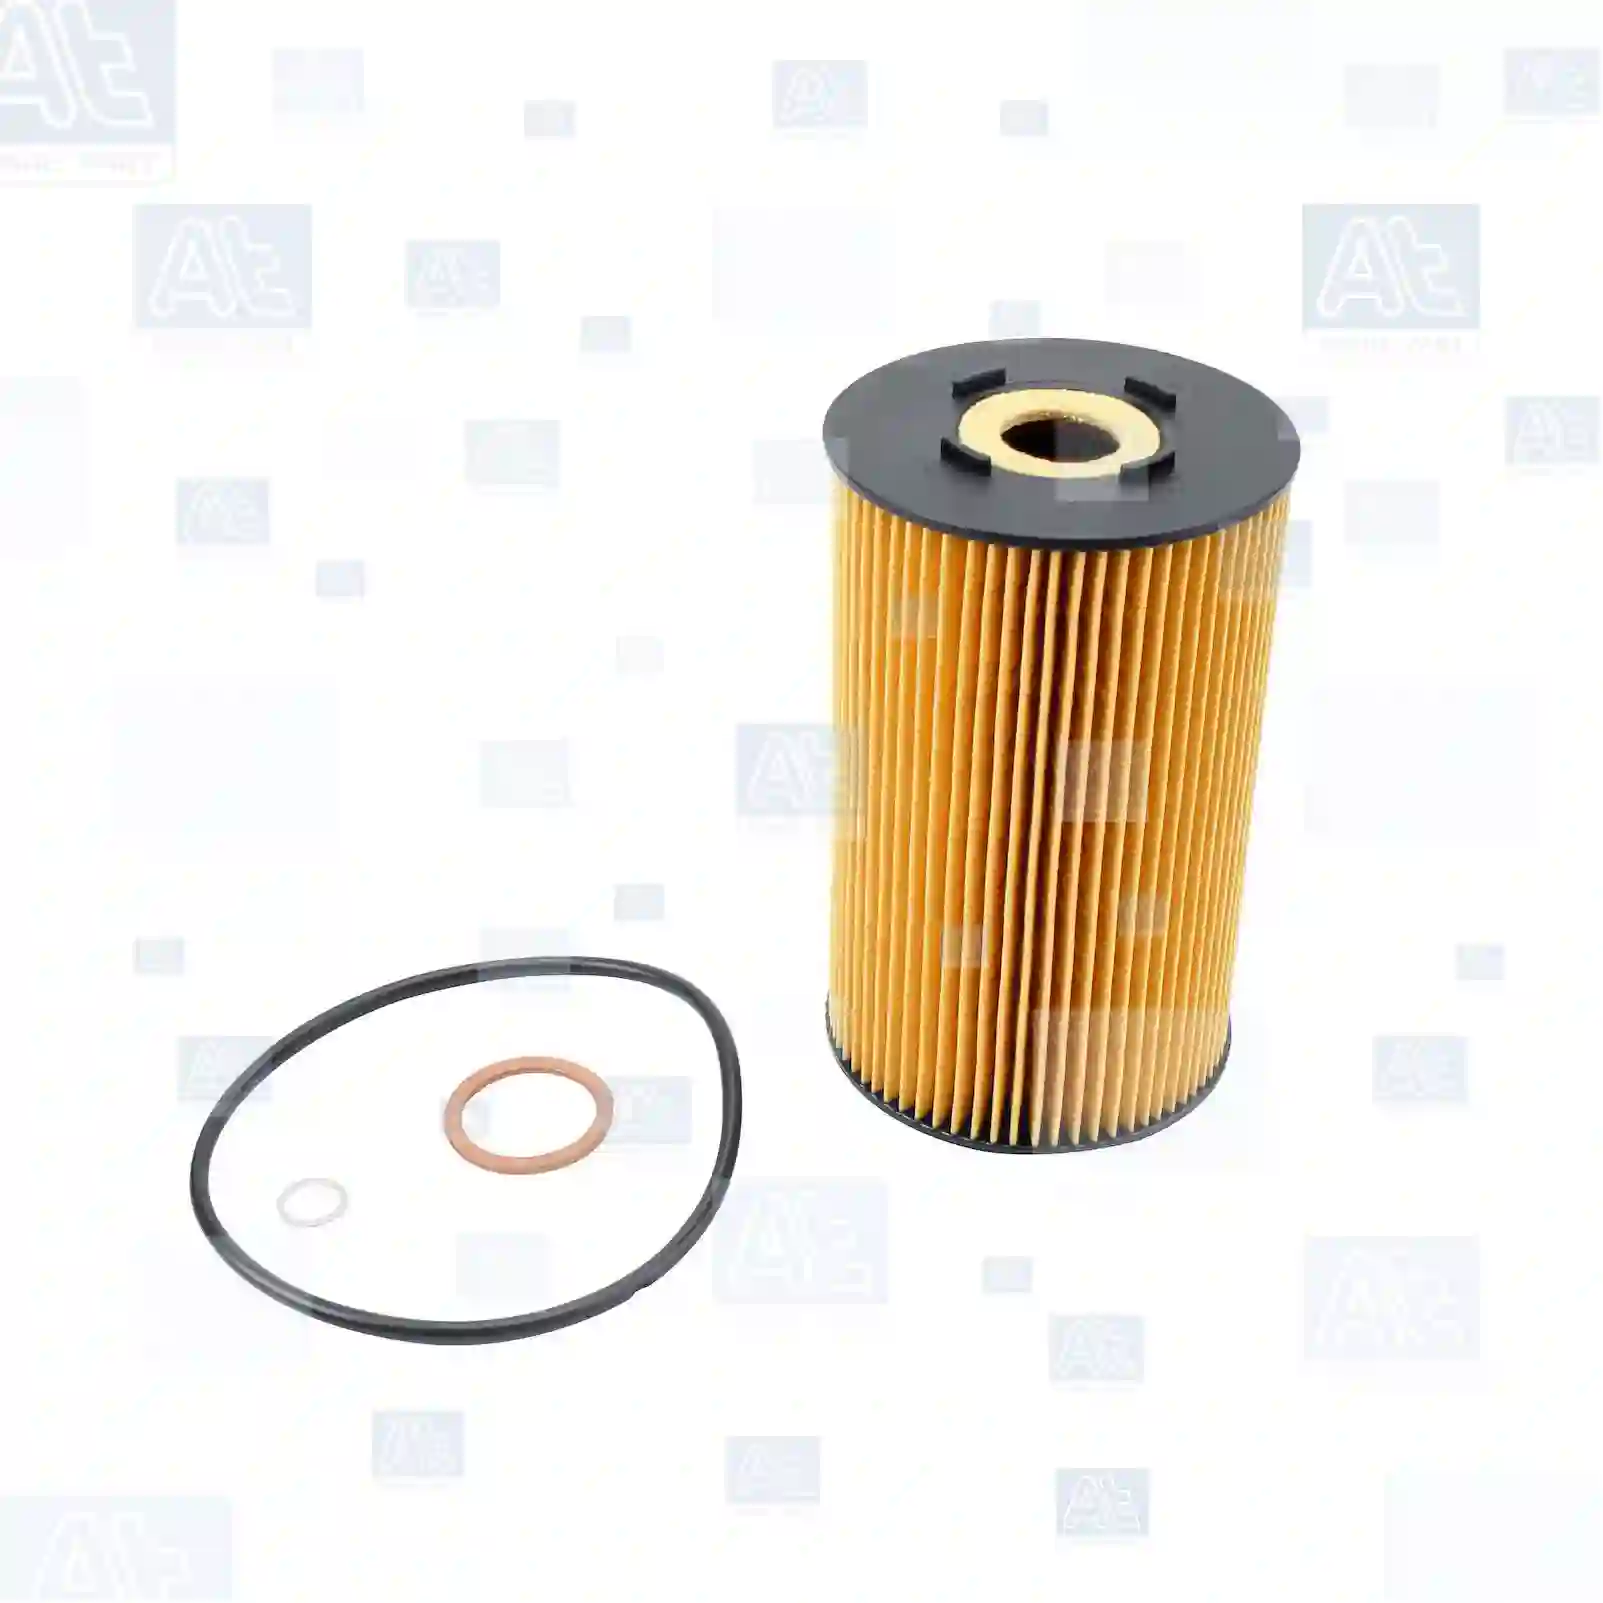 Oil filter insert, at no 77700594, oem no: 009889003, 9839003, 0001336380, 1500977, 211340, 236481, 13113674, 64991200, 12153208, 30301, 60541290003, F139207310510, F139207310511, 5000869, 236481, 25012769, 7984871, 7984871, 0009839003, 9839003, 01229988, 122998800, 24151104, 6750492156, AT260213, 570958308, 7211208, 30301, 0001800909, 0011844125, 0011844425, 0011845125, 0011845425, 0011845455, 3141800109, 3641800009, 3641800109, 364180010967, 3641800110, 3641800309, 3641840225, 3661841225, 605411820405, 6054129003, 605412970003, 905412970003, 0001229988, 0024151104, 0122998800, 5001846627, 6005019805, 6005019823, 6750492156, LU225, 15613-98001, 34318-47425 At Spare Part | Engine, Accelerator Pedal, Camshaft, Connecting Rod, Crankcase, Crankshaft, Cylinder Head, Engine Suspension Mountings, Exhaust Manifold, Exhaust Gas Recirculation, Filter Kits, Flywheel Housing, General Overhaul Kits, Engine, Intake Manifold, Oil Cleaner, Oil Cooler, Oil Filter, Oil Pump, Oil Sump, Piston & Liner, Sensor & Switch, Timing Case, Turbocharger, Cooling System, Belt Tensioner, Coolant Filter, Coolant Pipe, Corrosion Prevention Agent, Drive, Expansion Tank, Fan, Intercooler, Monitors & Gauges, Radiator, Thermostat, V-Belt / Timing belt, Water Pump, Fuel System, Electronical Injector Unit, Feed Pump, Fuel Filter, cpl., Fuel Gauge Sender,  Fuel Line, Fuel Pump, Fuel Tank, Injection Line Kit, Injection Pump, Exhaust System, Clutch & Pedal, Gearbox, Propeller Shaft, Axles, Brake System, Hubs & Wheels, Suspension, Leaf Spring, Universal Parts / Accessories, Steering, Electrical System, Cabin Oil filter insert, at no 77700594, oem no: 009889003, 9839003, 0001336380, 1500977, 211340, 236481, 13113674, 64991200, 12153208, 30301, 60541290003, F139207310510, F139207310511, 5000869, 236481, 25012769, 7984871, 7984871, 0009839003, 9839003, 01229988, 122998800, 24151104, 6750492156, AT260213, 570958308, 7211208, 30301, 0001800909, 0011844125, 0011844425, 0011845125, 0011845425, 0011845455, 3141800109, 3641800009, 3641800109, 364180010967, 3641800110, 3641800309, 3641840225, 3661841225, 605411820405, 6054129003, 605412970003, 905412970003, 0001229988, 0024151104, 0122998800, 5001846627, 6005019805, 6005019823, 6750492156, LU225, 15613-98001, 34318-47425 At Spare Part | Engine, Accelerator Pedal, Camshaft, Connecting Rod, Crankcase, Crankshaft, Cylinder Head, Engine Suspension Mountings, Exhaust Manifold, Exhaust Gas Recirculation, Filter Kits, Flywheel Housing, General Overhaul Kits, Engine, Intake Manifold, Oil Cleaner, Oil Cooler, Oil Filter, Oil Pump, Oil Sump, Piston & Liner, Sensor & Switch, Timing Case, Turbocharger, Cooling System, Belt Tensioner, Coolant Filter, Coolant Pipe, Corrosion Prevention Agent, Drive, Expansion Tank, Fan, Intercooler, Monitors & Gauges, Radiator, Thermostat, V-Belt / Timing belt, Water Pump, Fuel System, Electronical Injector Unit, Feed Pump, Fuel Filter, cpl., Fuel Gauge Sender,  Fuel Line, Fuel Pump, Fuel Tank, Injection Line Kit, Injection Pump, Exhaust System, Clutch & Pedal, Gearbox, Propeller Shaft, Axles, Brake System, Hubs & Wheels, Suspension, Leaf Spring, Universal Parts / Accessories, Steering, Electrical System, Cabin